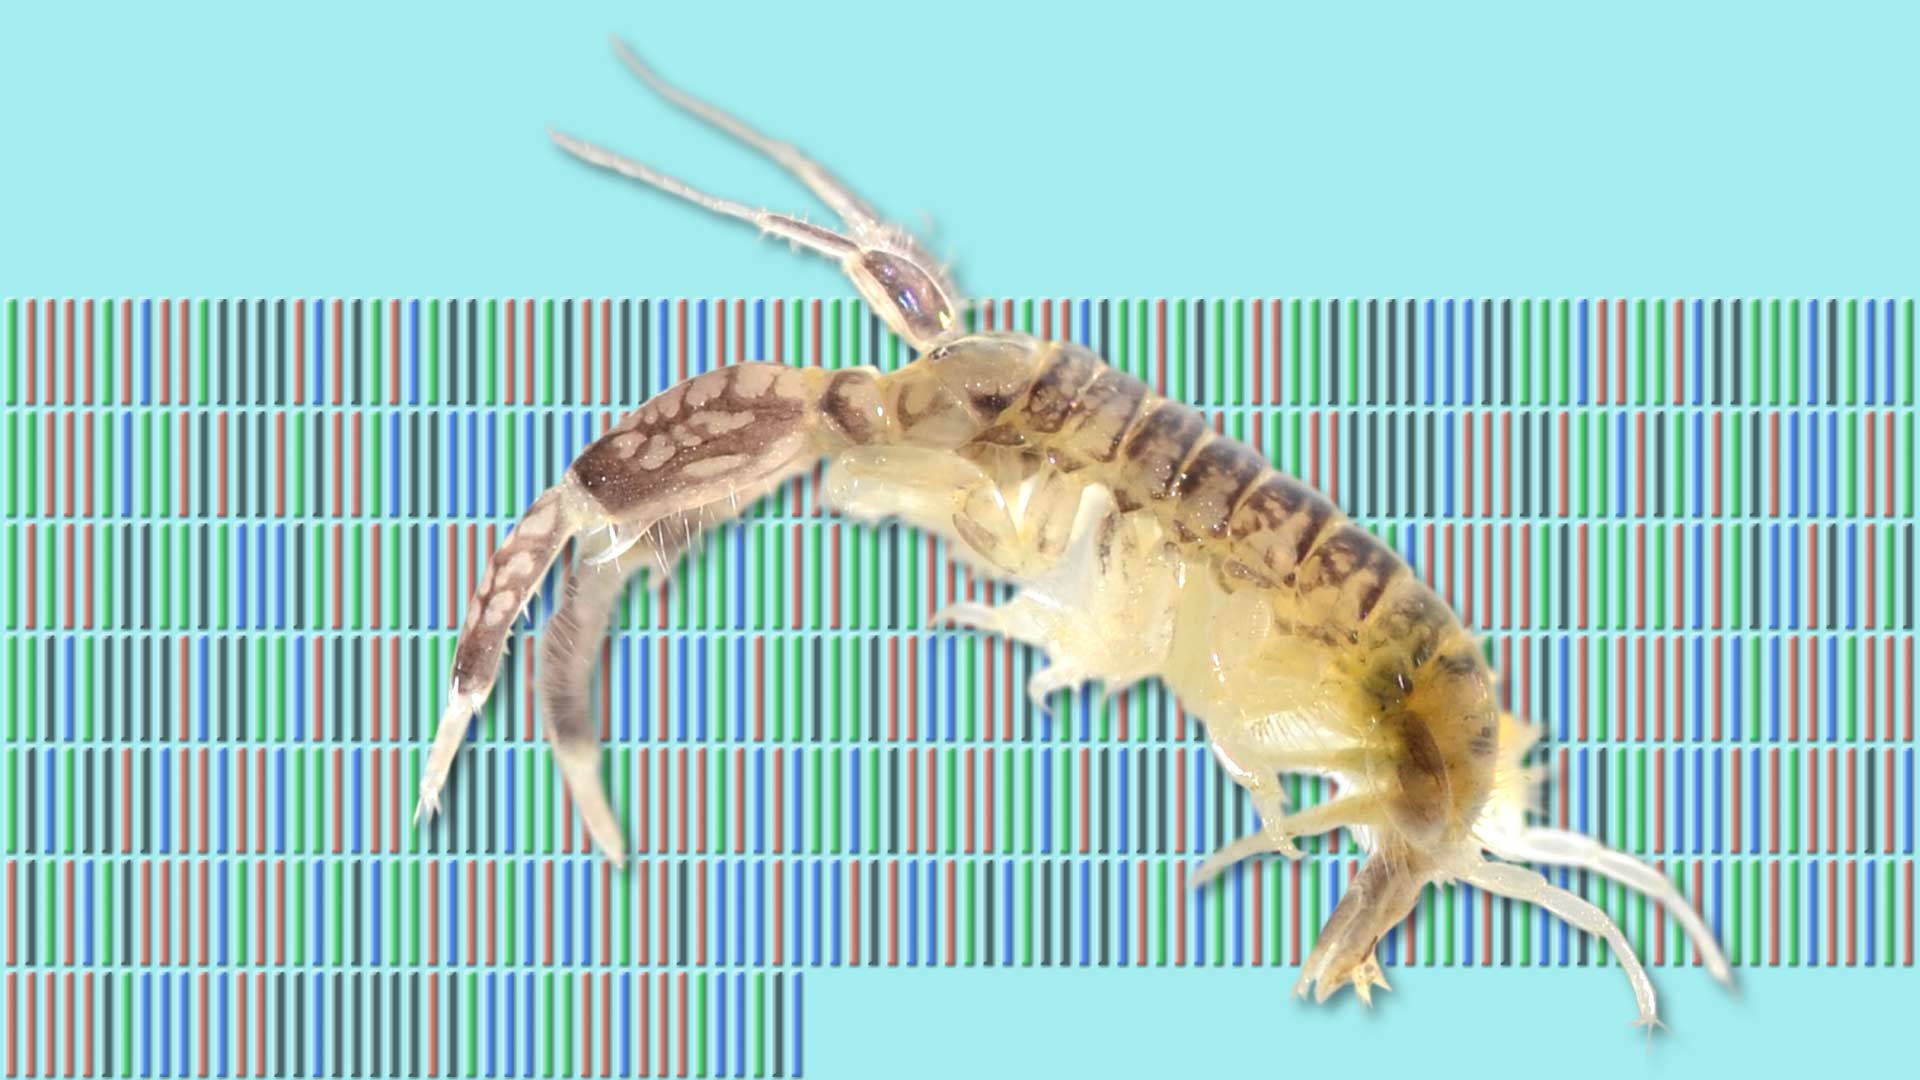 image of shrimp with barcoding in background